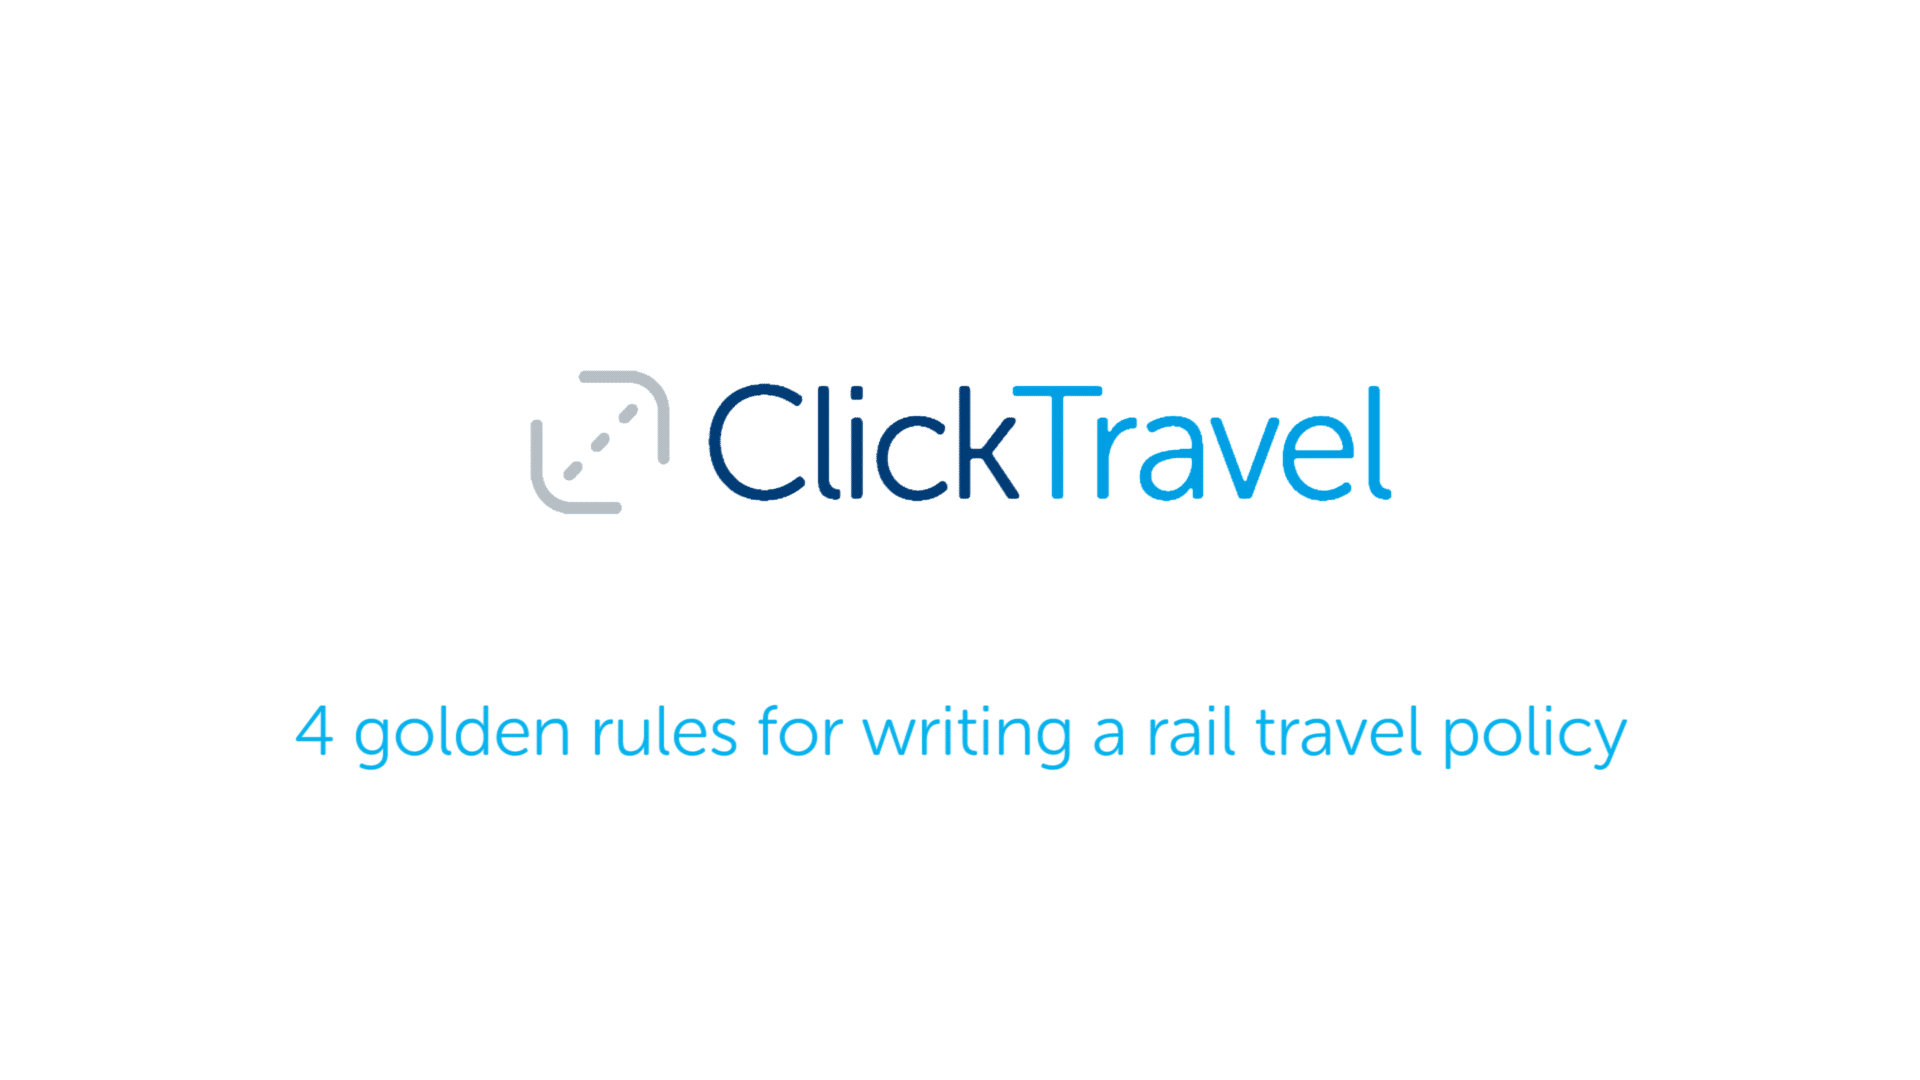 [VIDEO] 4 golden rules for writing a rail travel policy